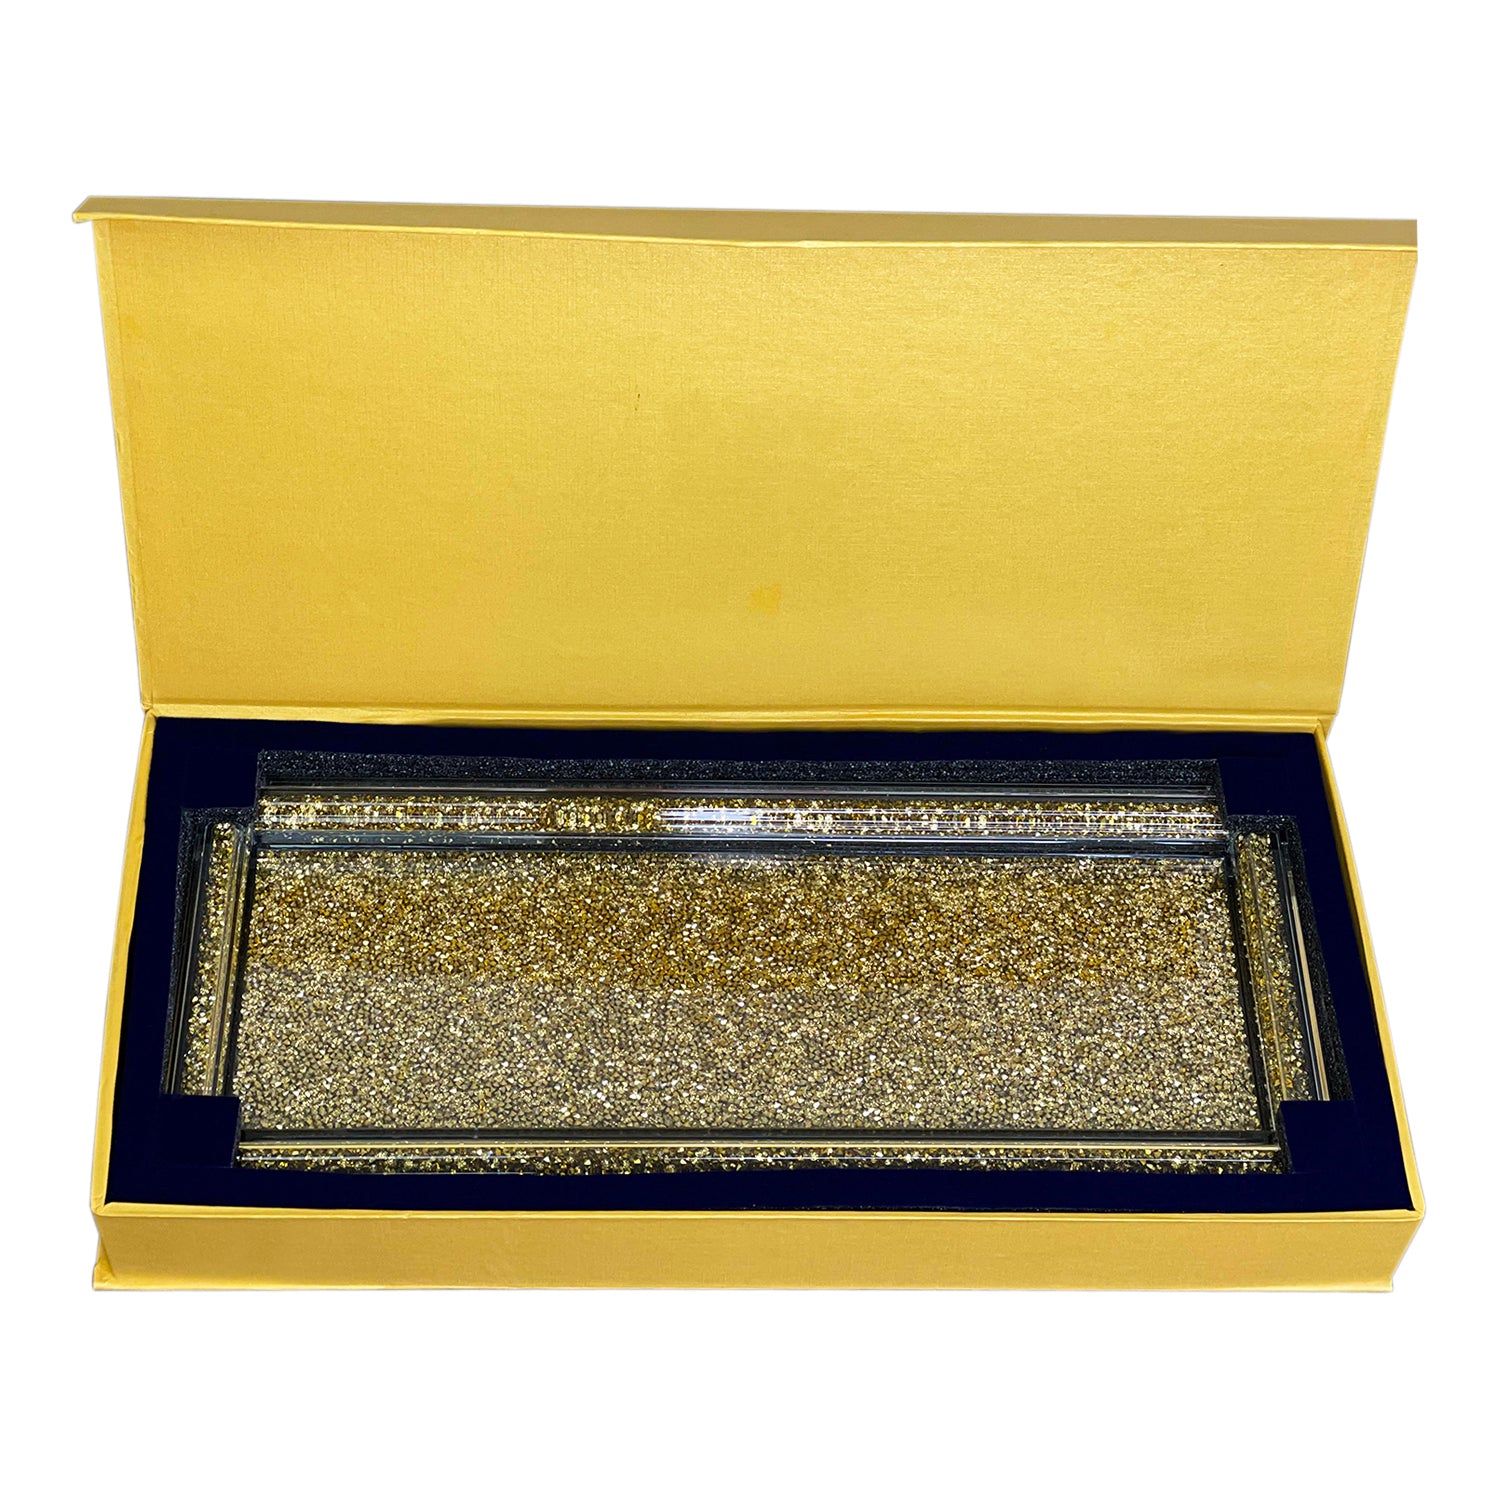 Ambrose Exquisite Medium Glass Tray in Gift Box gold-glass